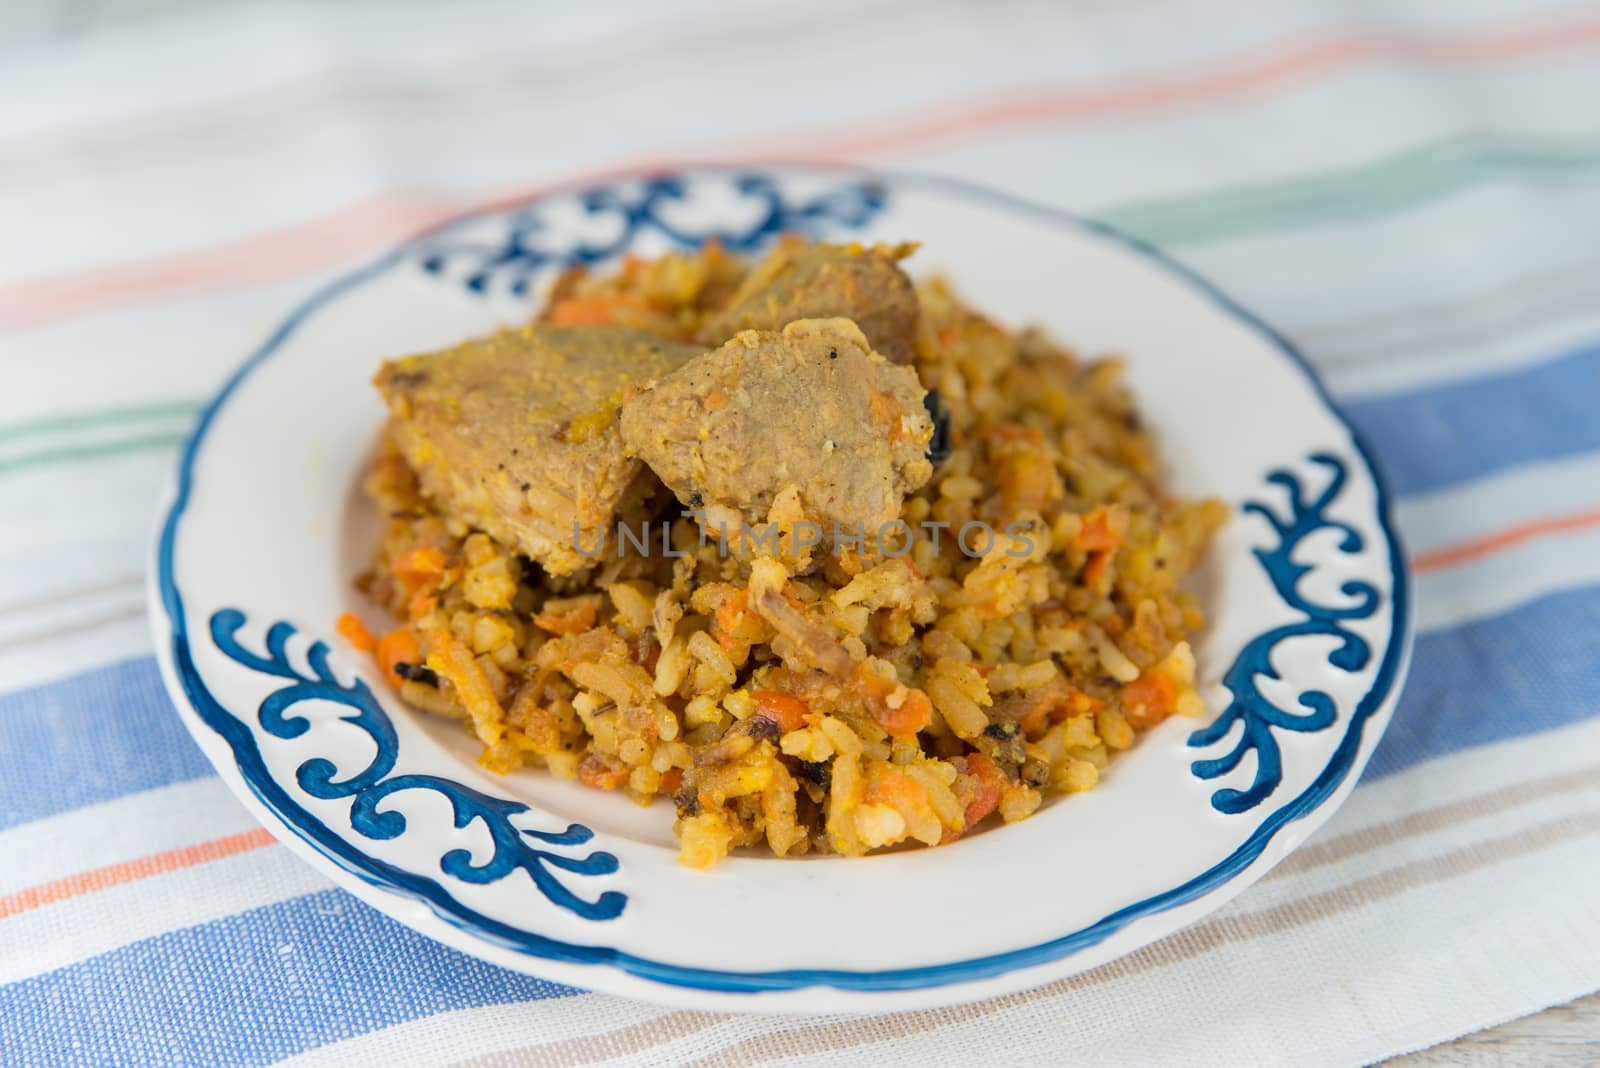 Plate of rice and meat national dish pilau